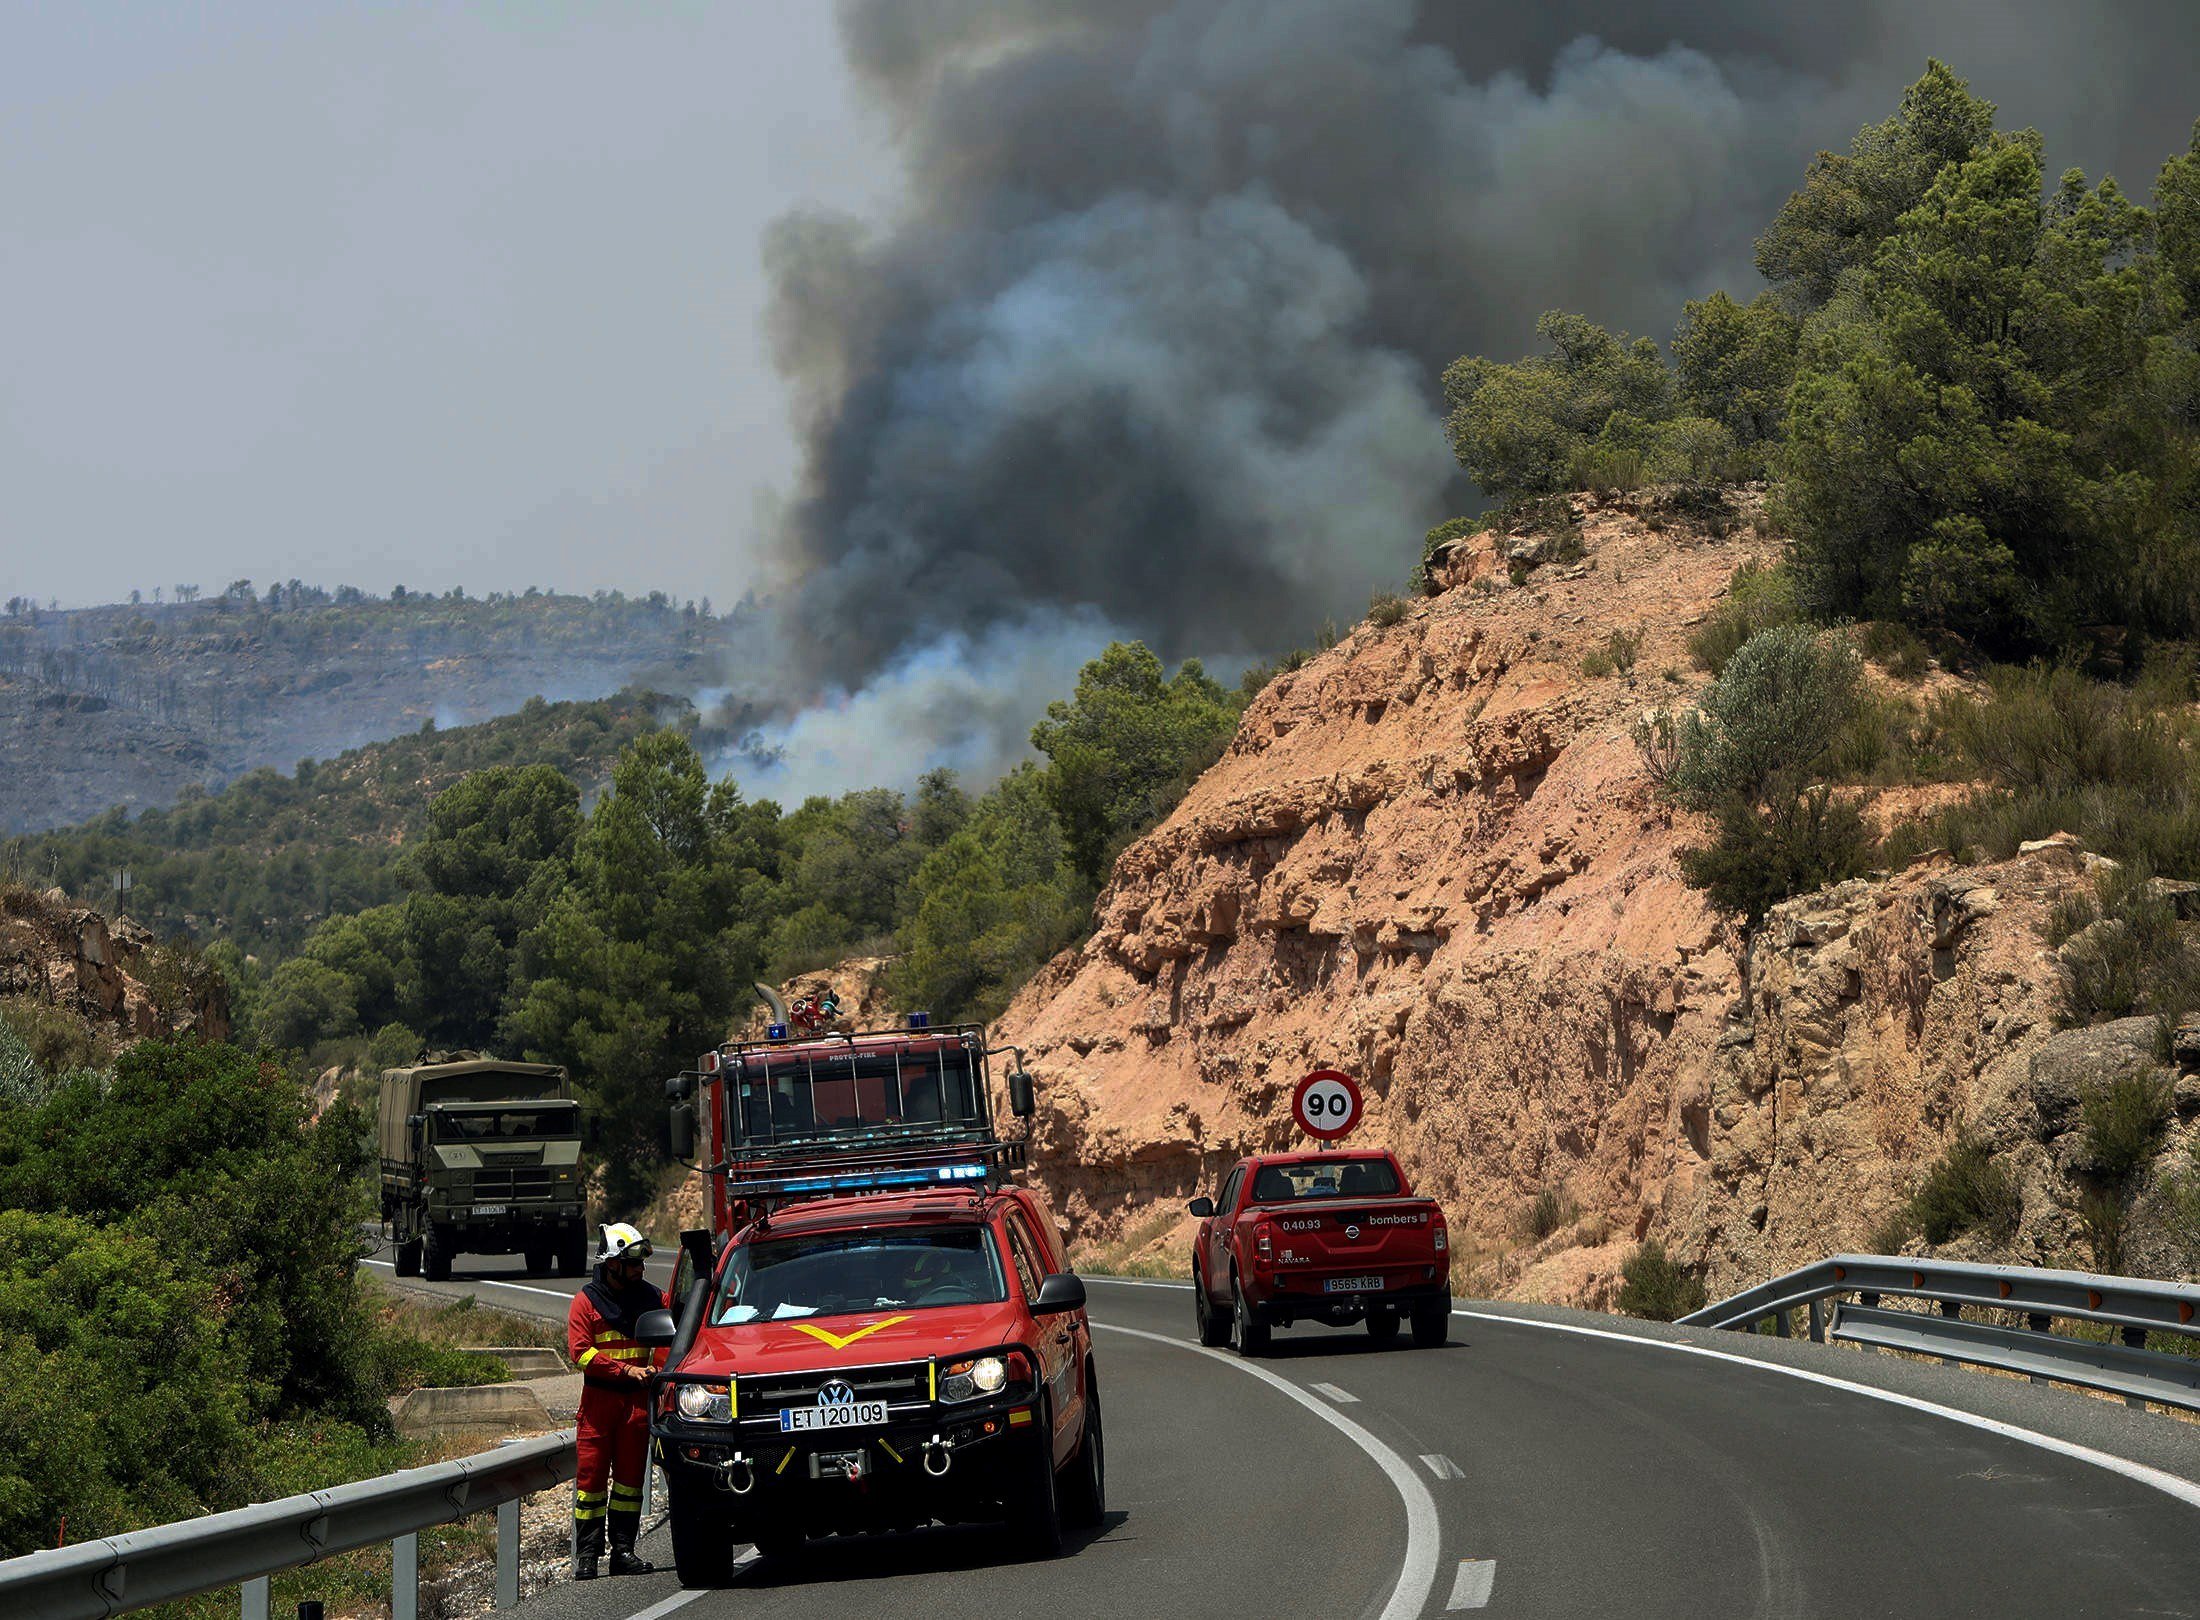 Catalonia facing one its worst wildfires in 20 years